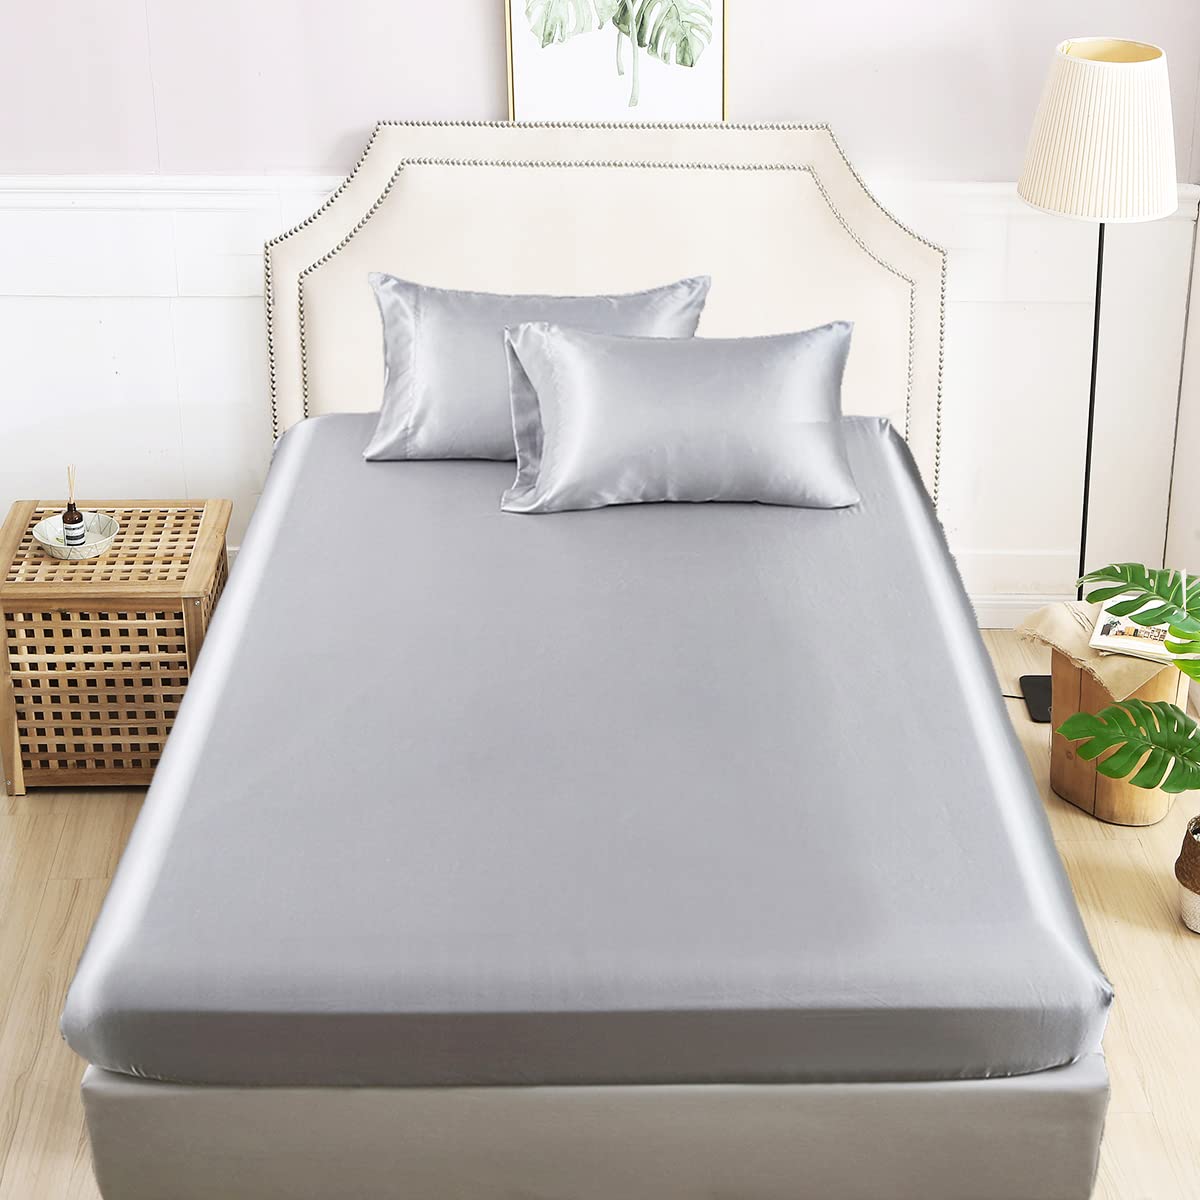 DuShow Satin Fitted Sheet Double Sliver Grey,Stripe Silky Deep Pocket(35cm) Satin Bed Sheets,Breathable Soft Comfortable Satin sheets Double,Fitted Sheet Only(Sliver Grey,Double)